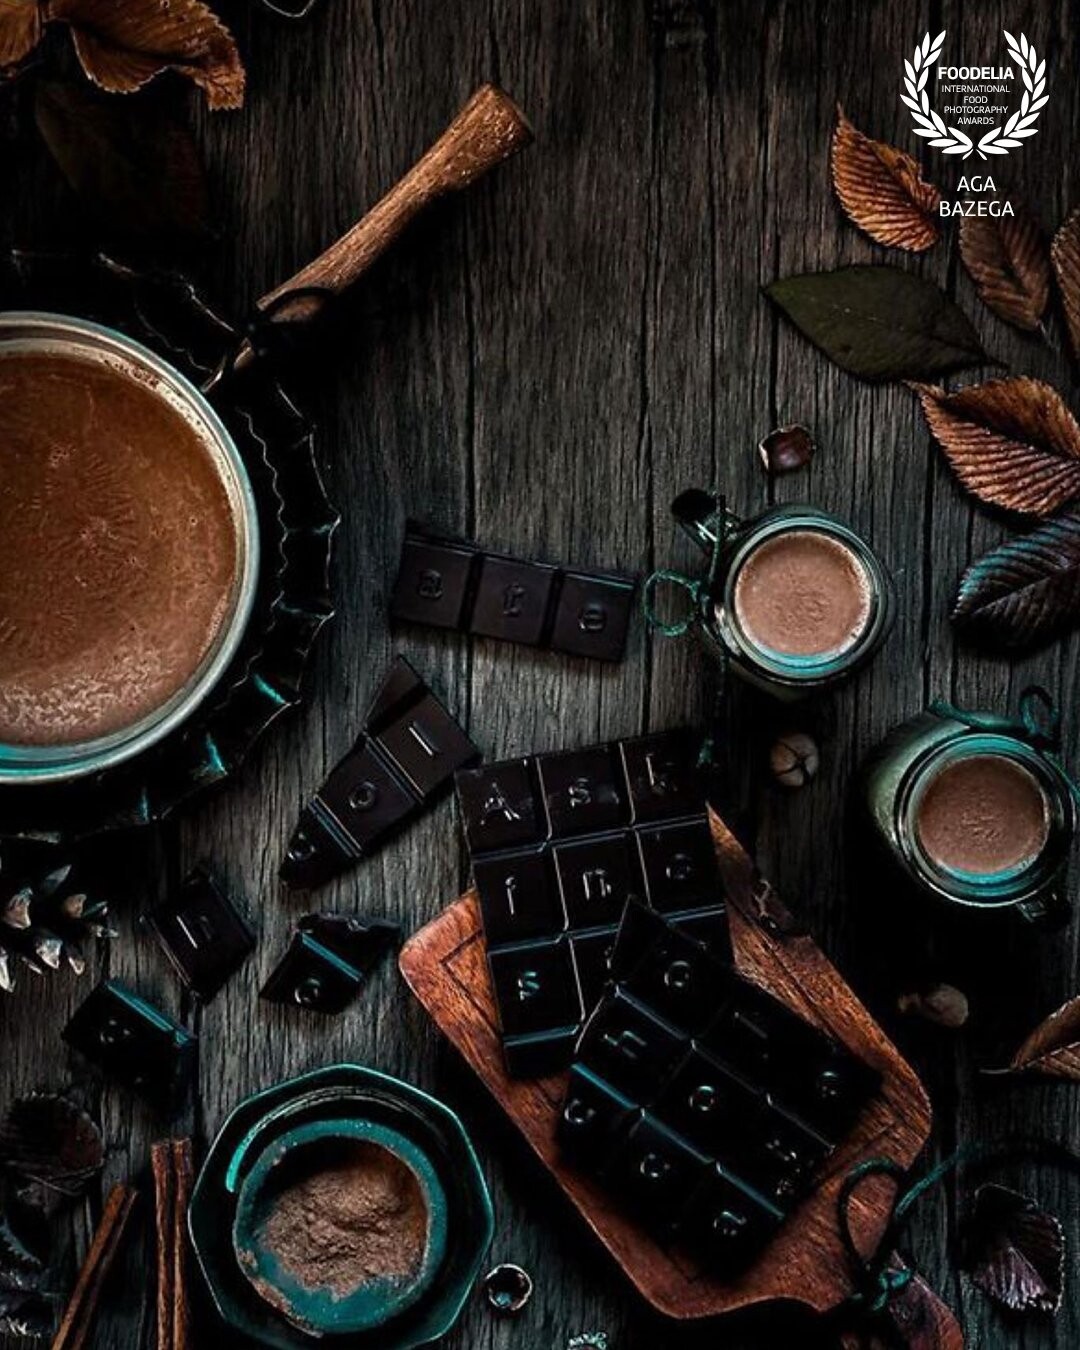 Hot chocolate, the best warming drink during chilly season, a great natural source of an important mineral- magnesium. Captured with a natural light.